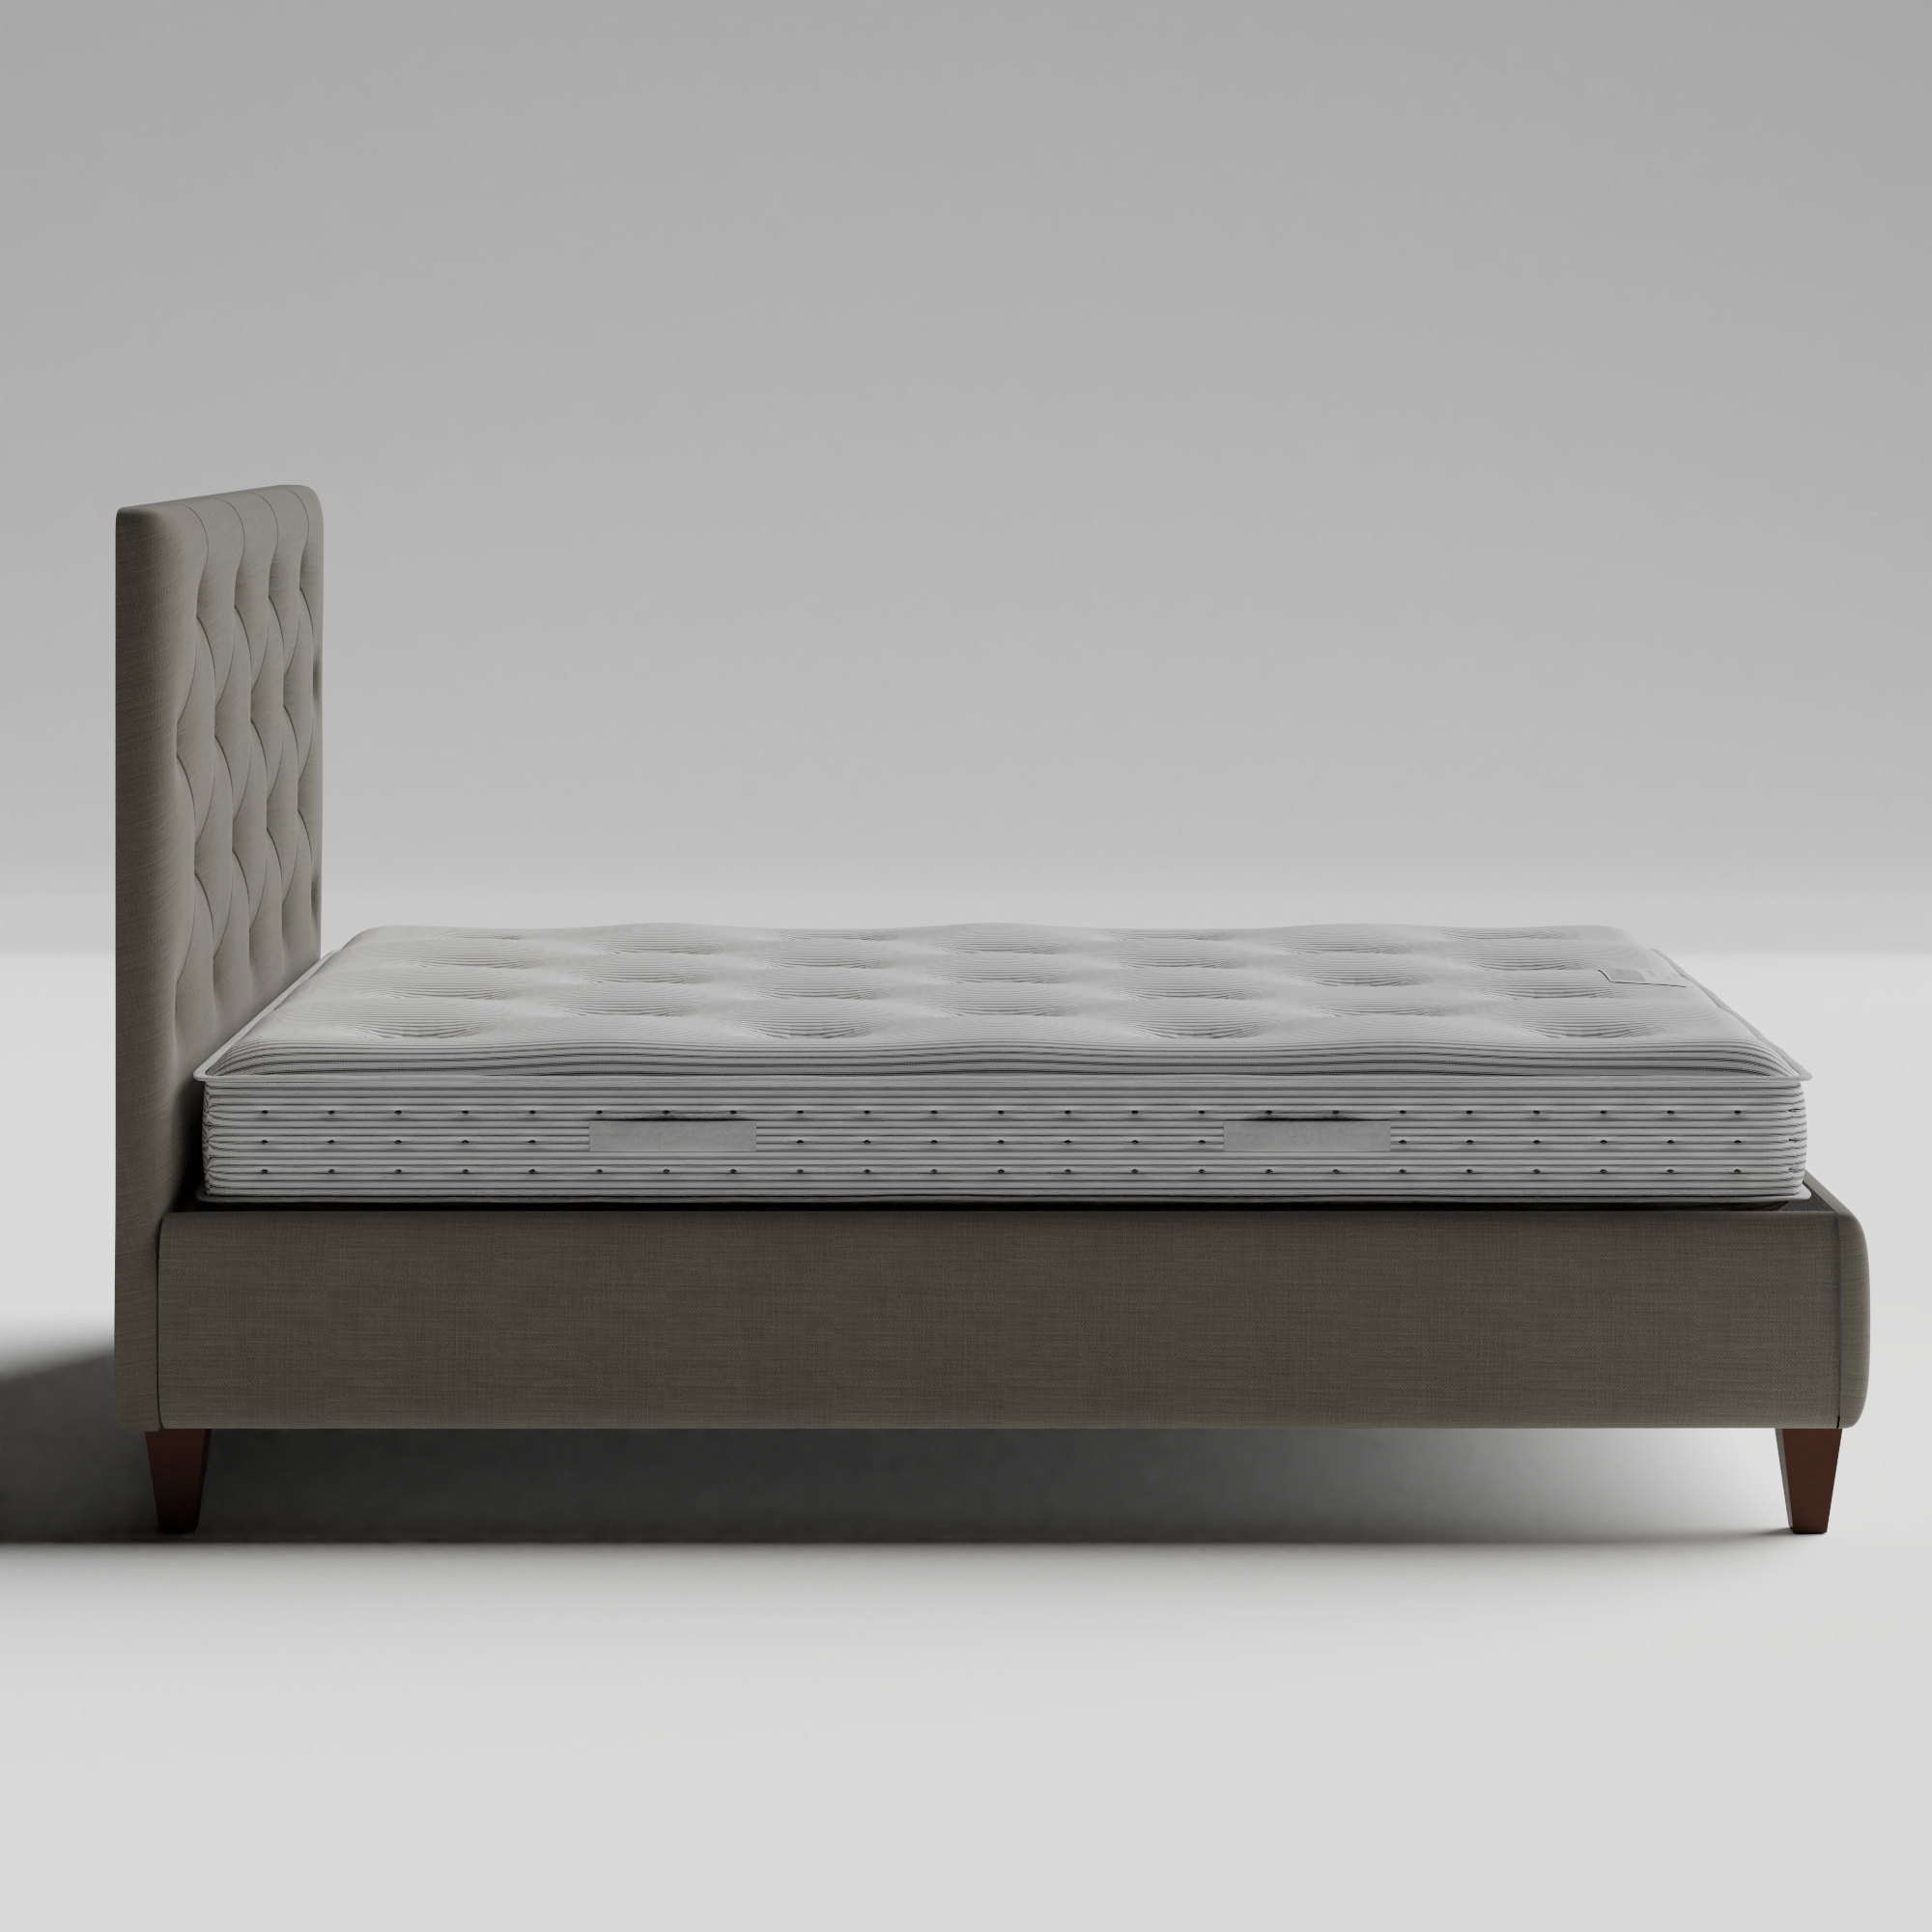 Yushan Deep Buttoned stoffen bed in grijs met lades